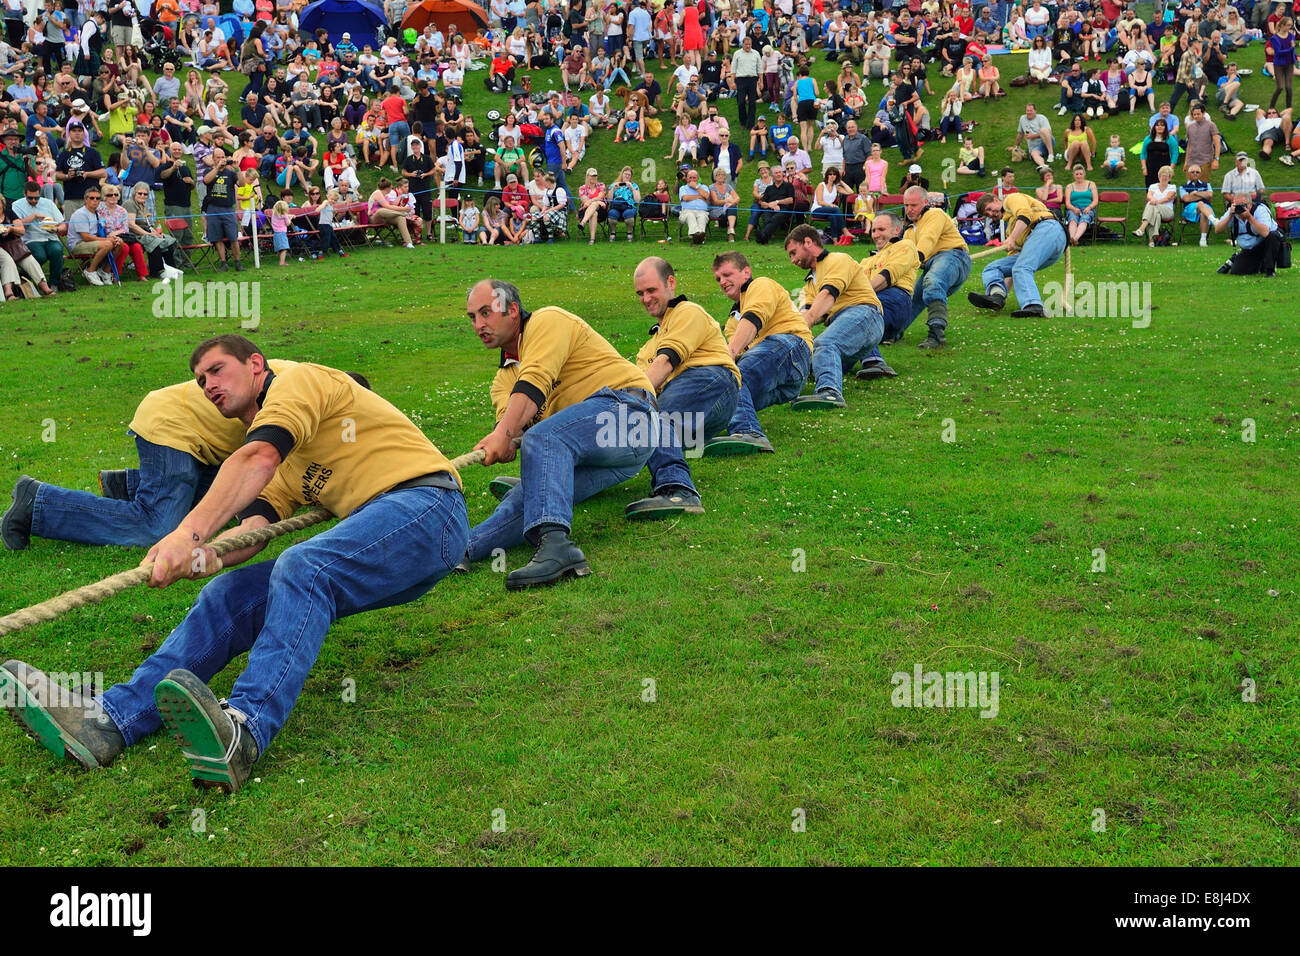 Tug-of-War, one of the disciplines at the Highland Games, Dufftown, Moray, Highlands, Scotland, United Kingdom Stock Photo